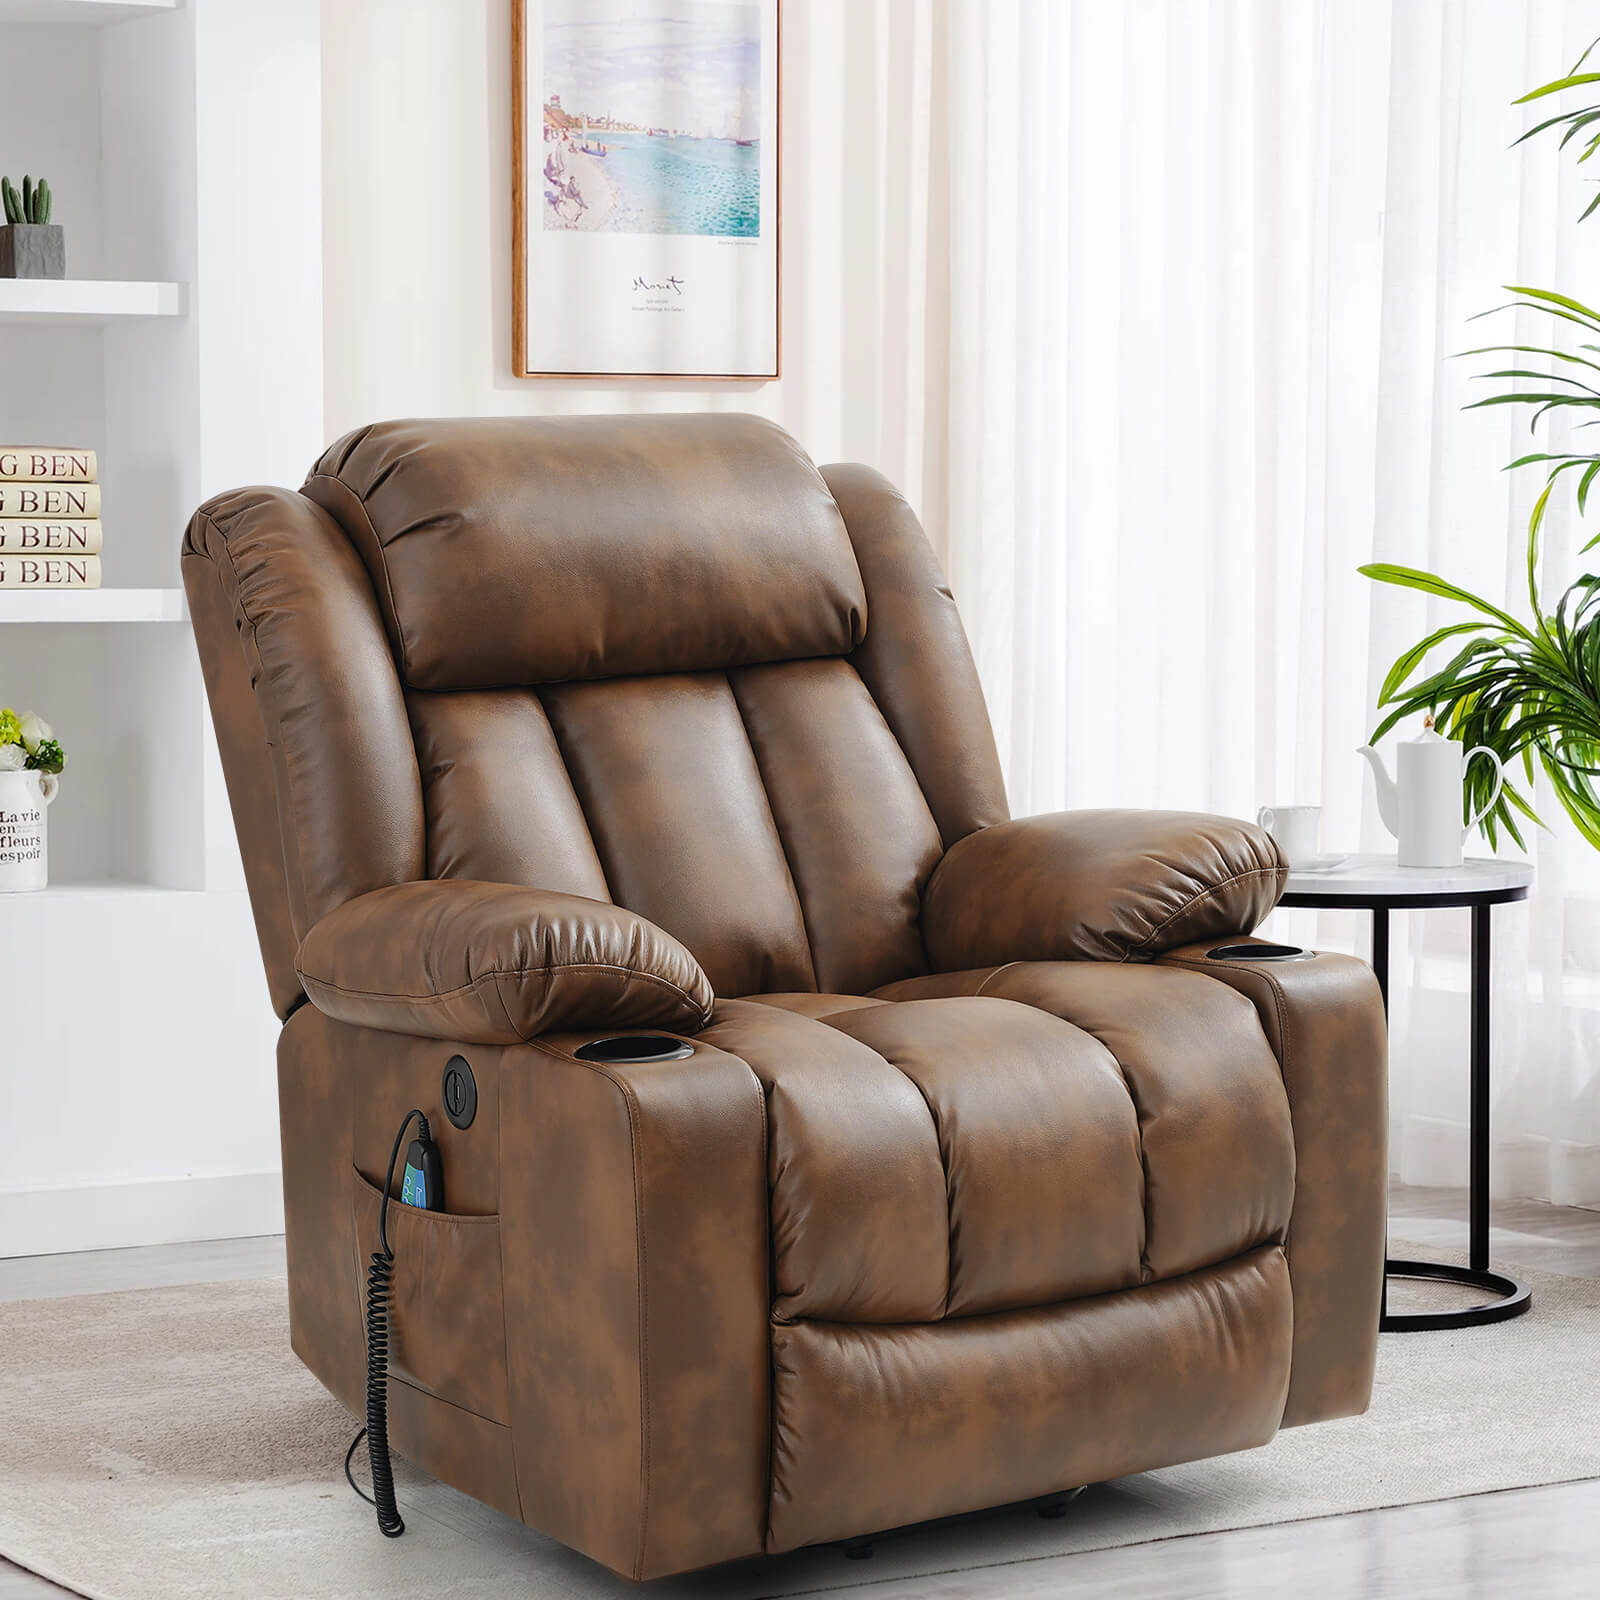 soulout power lift chair recliners for elderly light brown